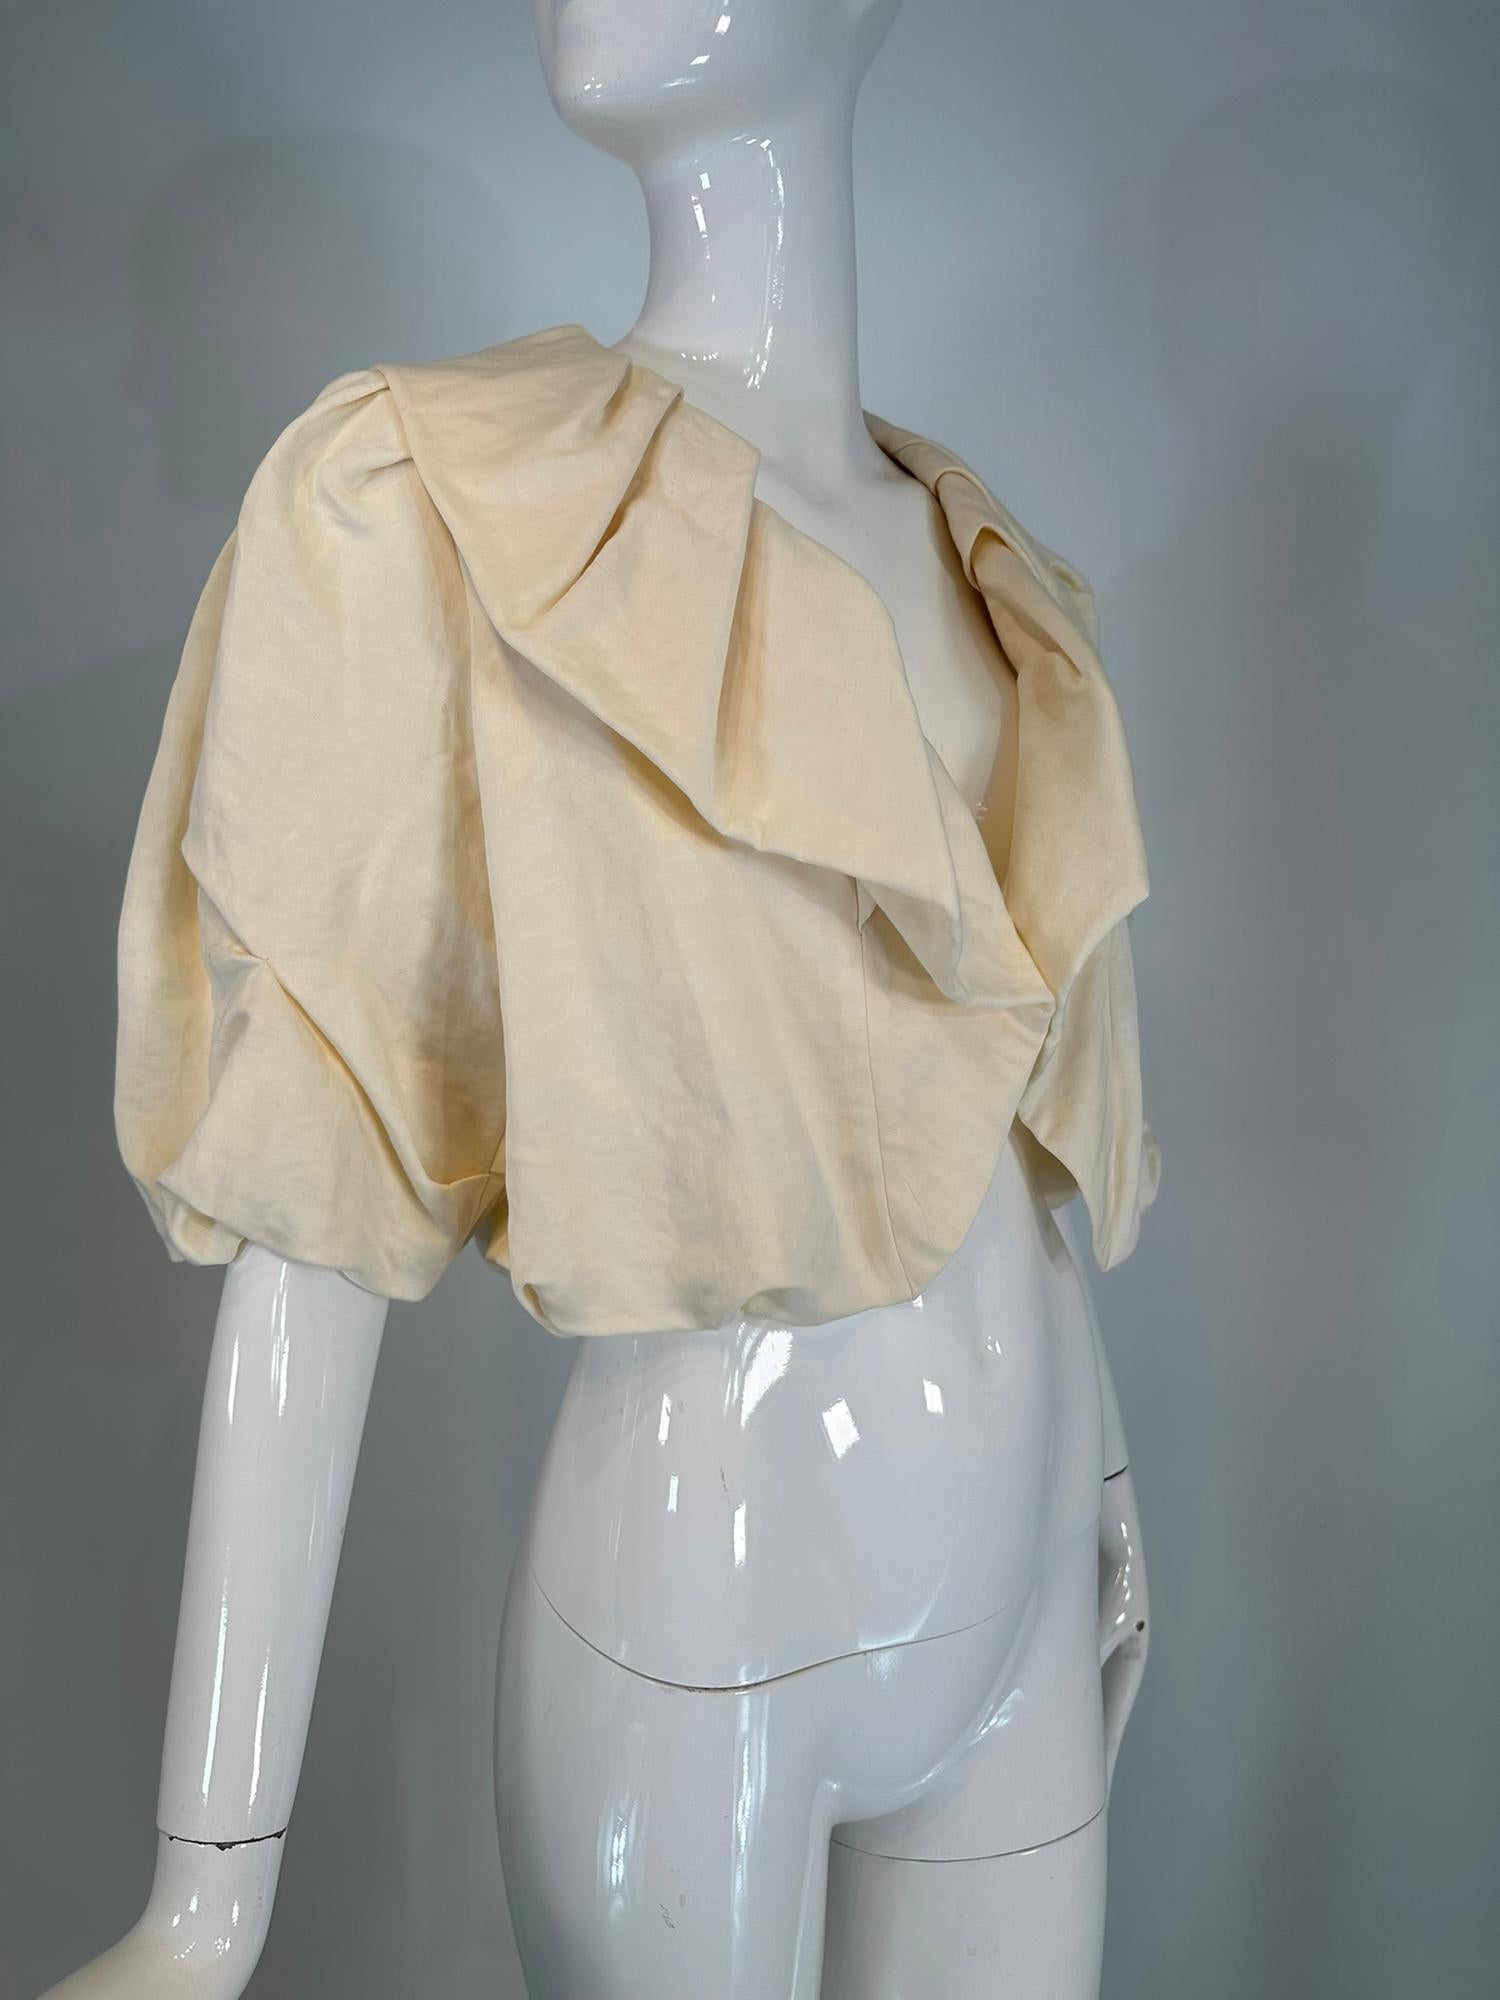 Lanvin Ete' 2006 Alber Elbaz Cream Shawl Collar Cropped Puff Sleeve Jacket  In Excellent Condition For Sale In West Palm Beach, FL